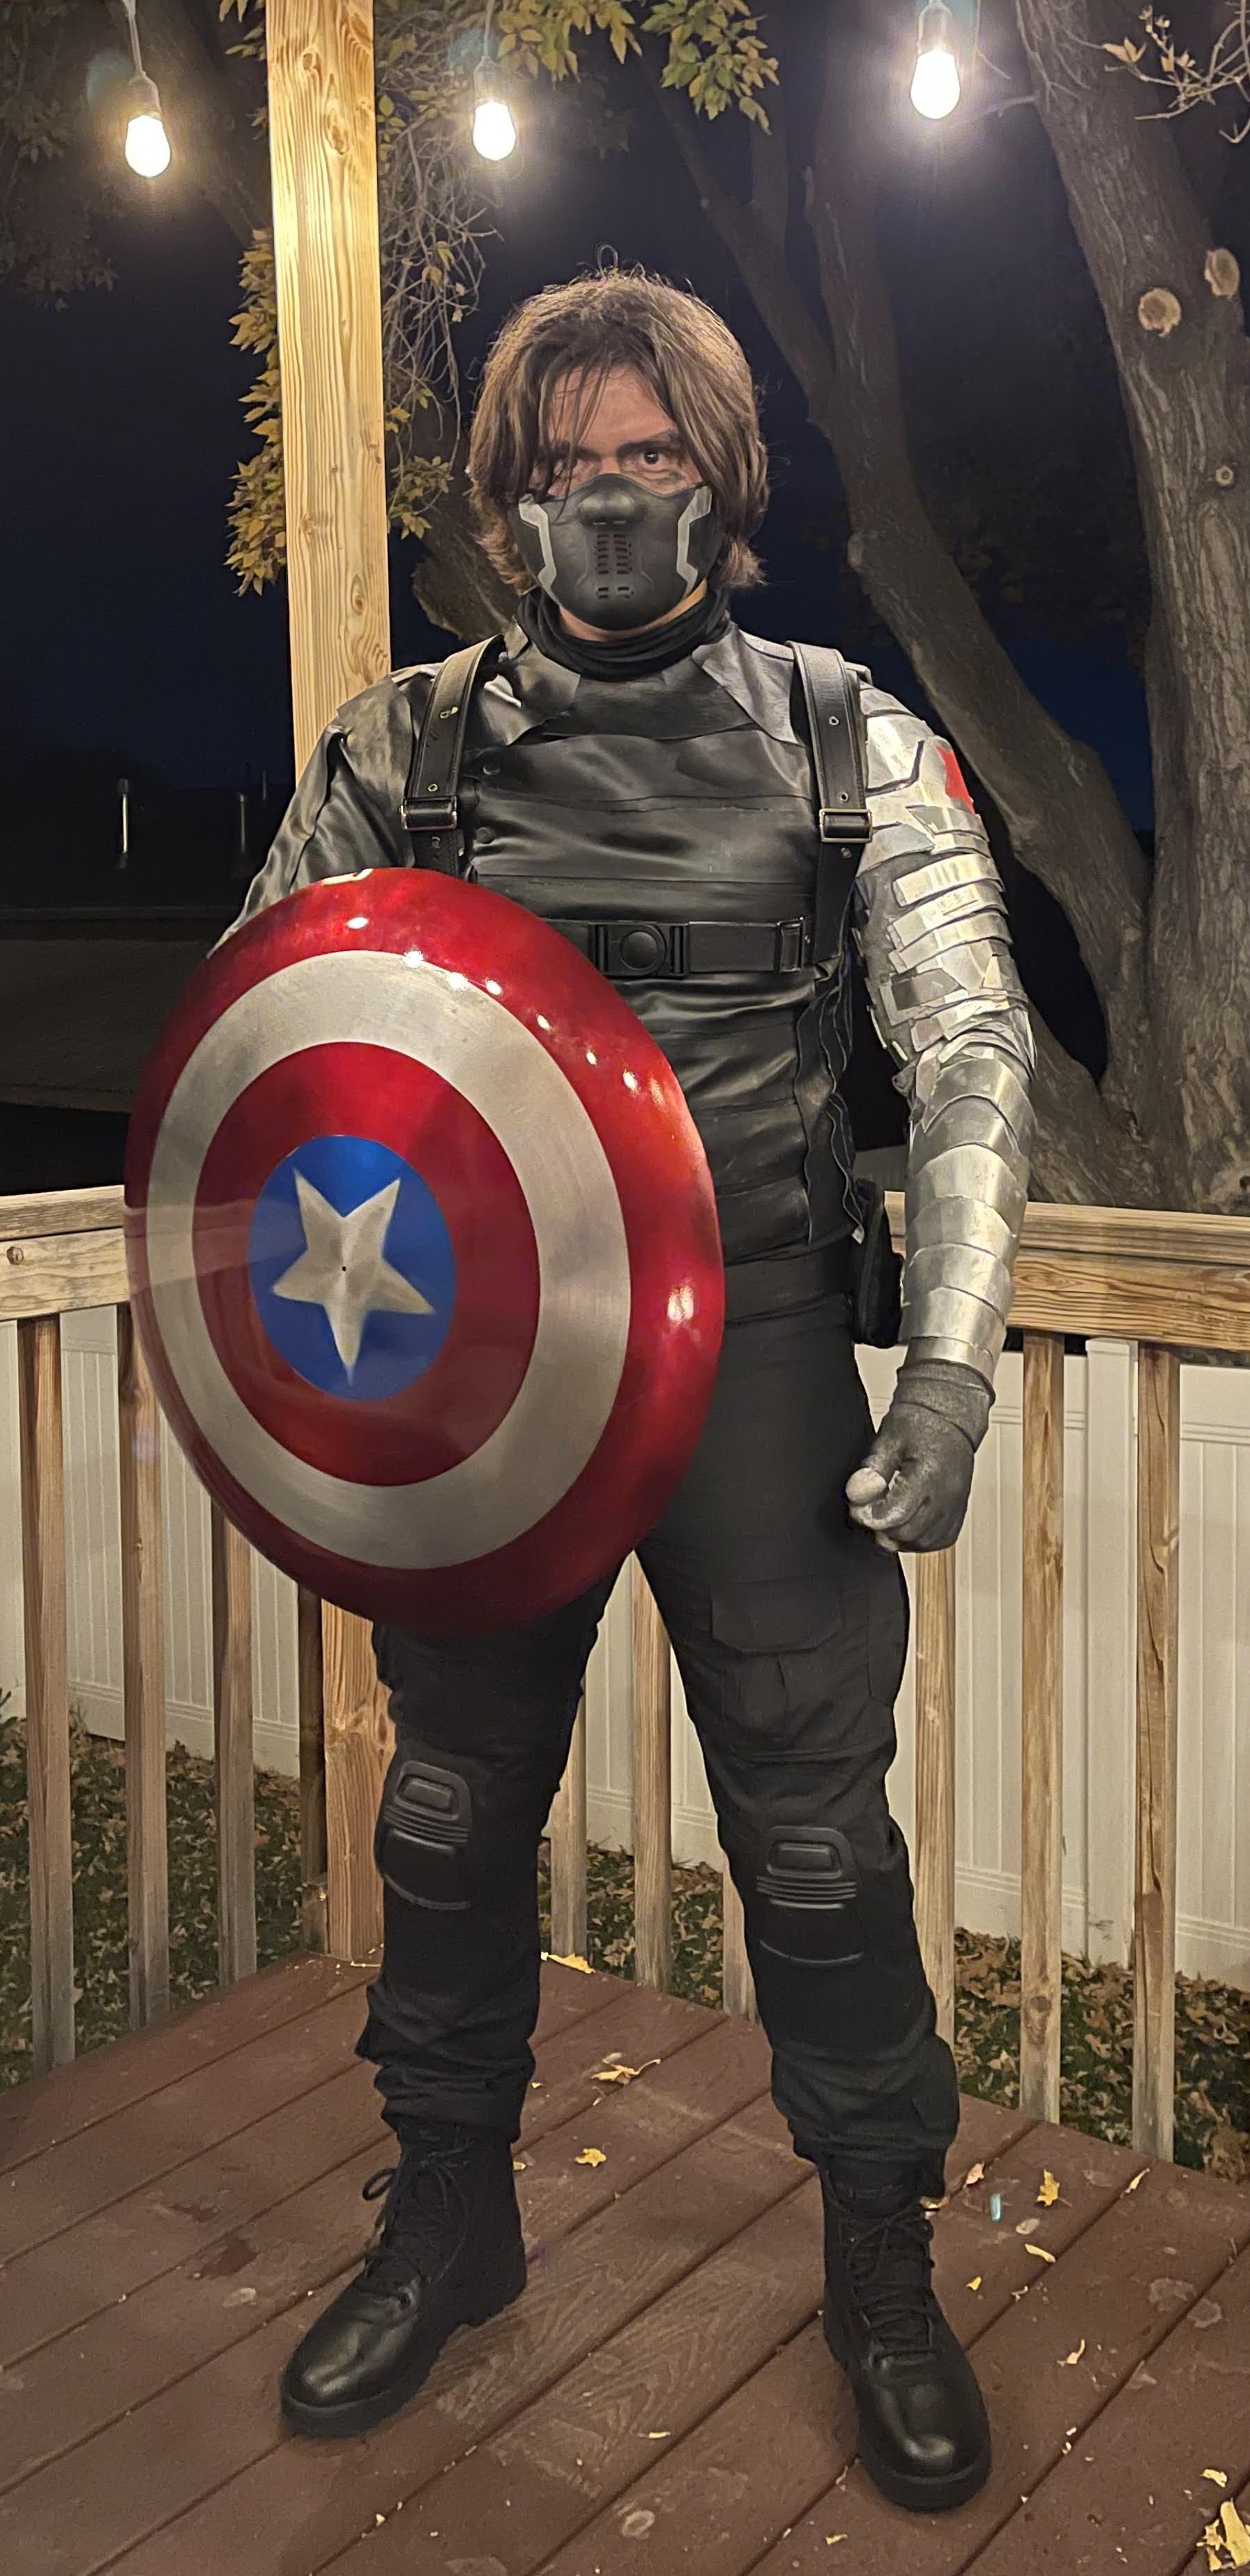 Stephen Dressed in the Winter Soldier Full Costume